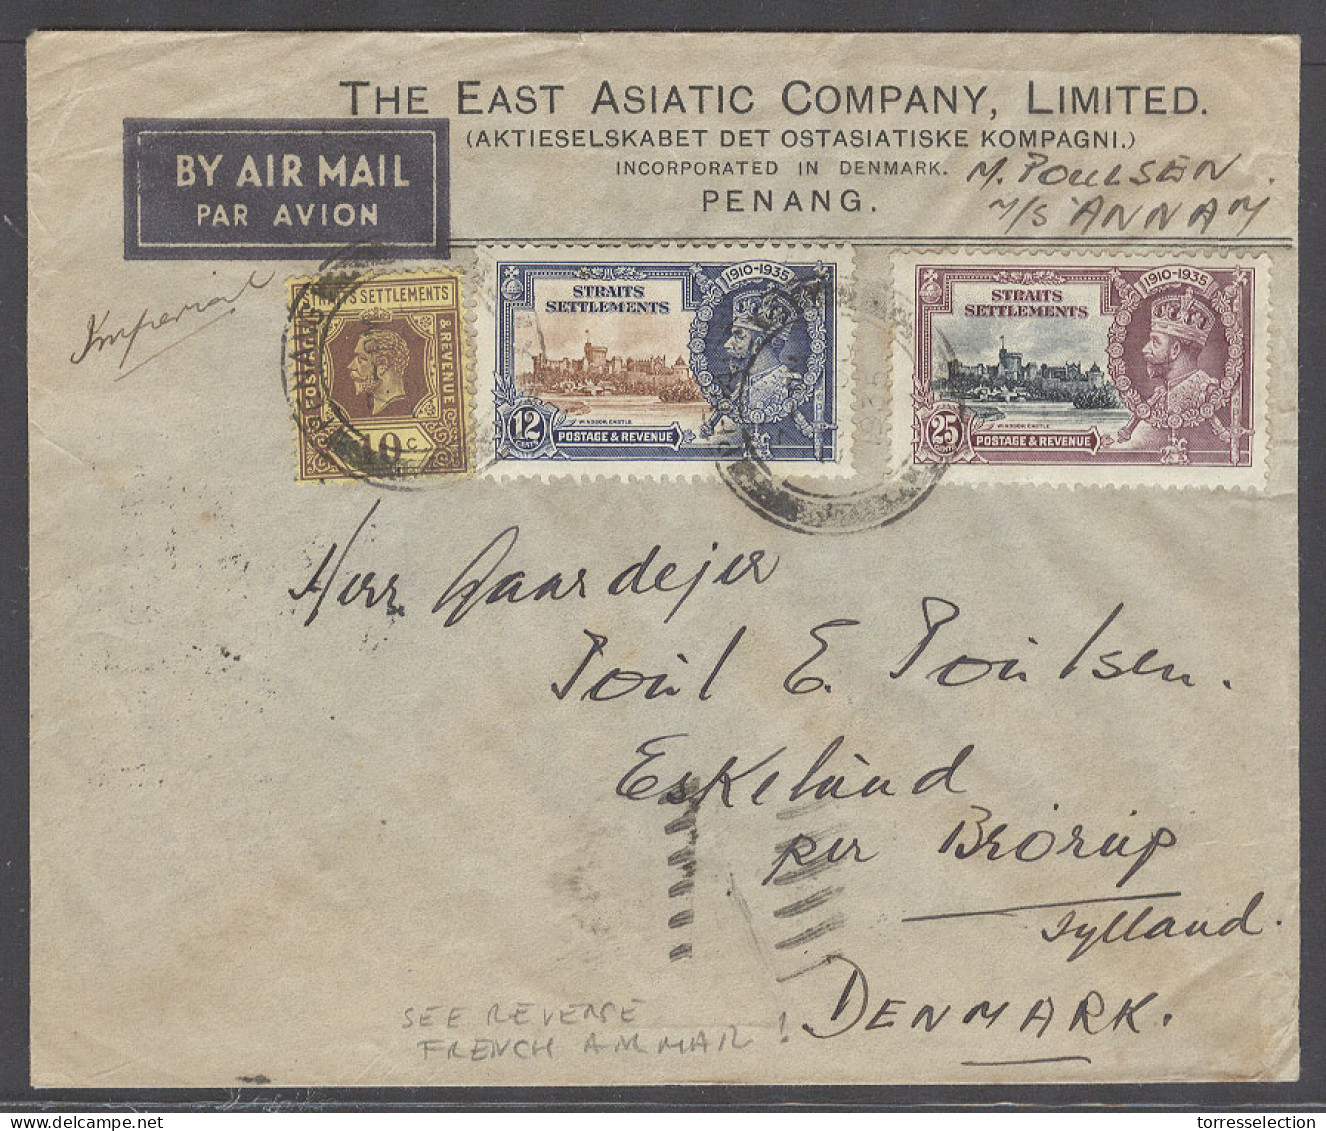 MALAYSIA. 1935 (23 Oct). Penang - Denmark, Eskilaad. Air Multifkd Env Incl Silver Jubilee Issue 47c Rarte Mns Imperial A - Malaysia (1964-...)